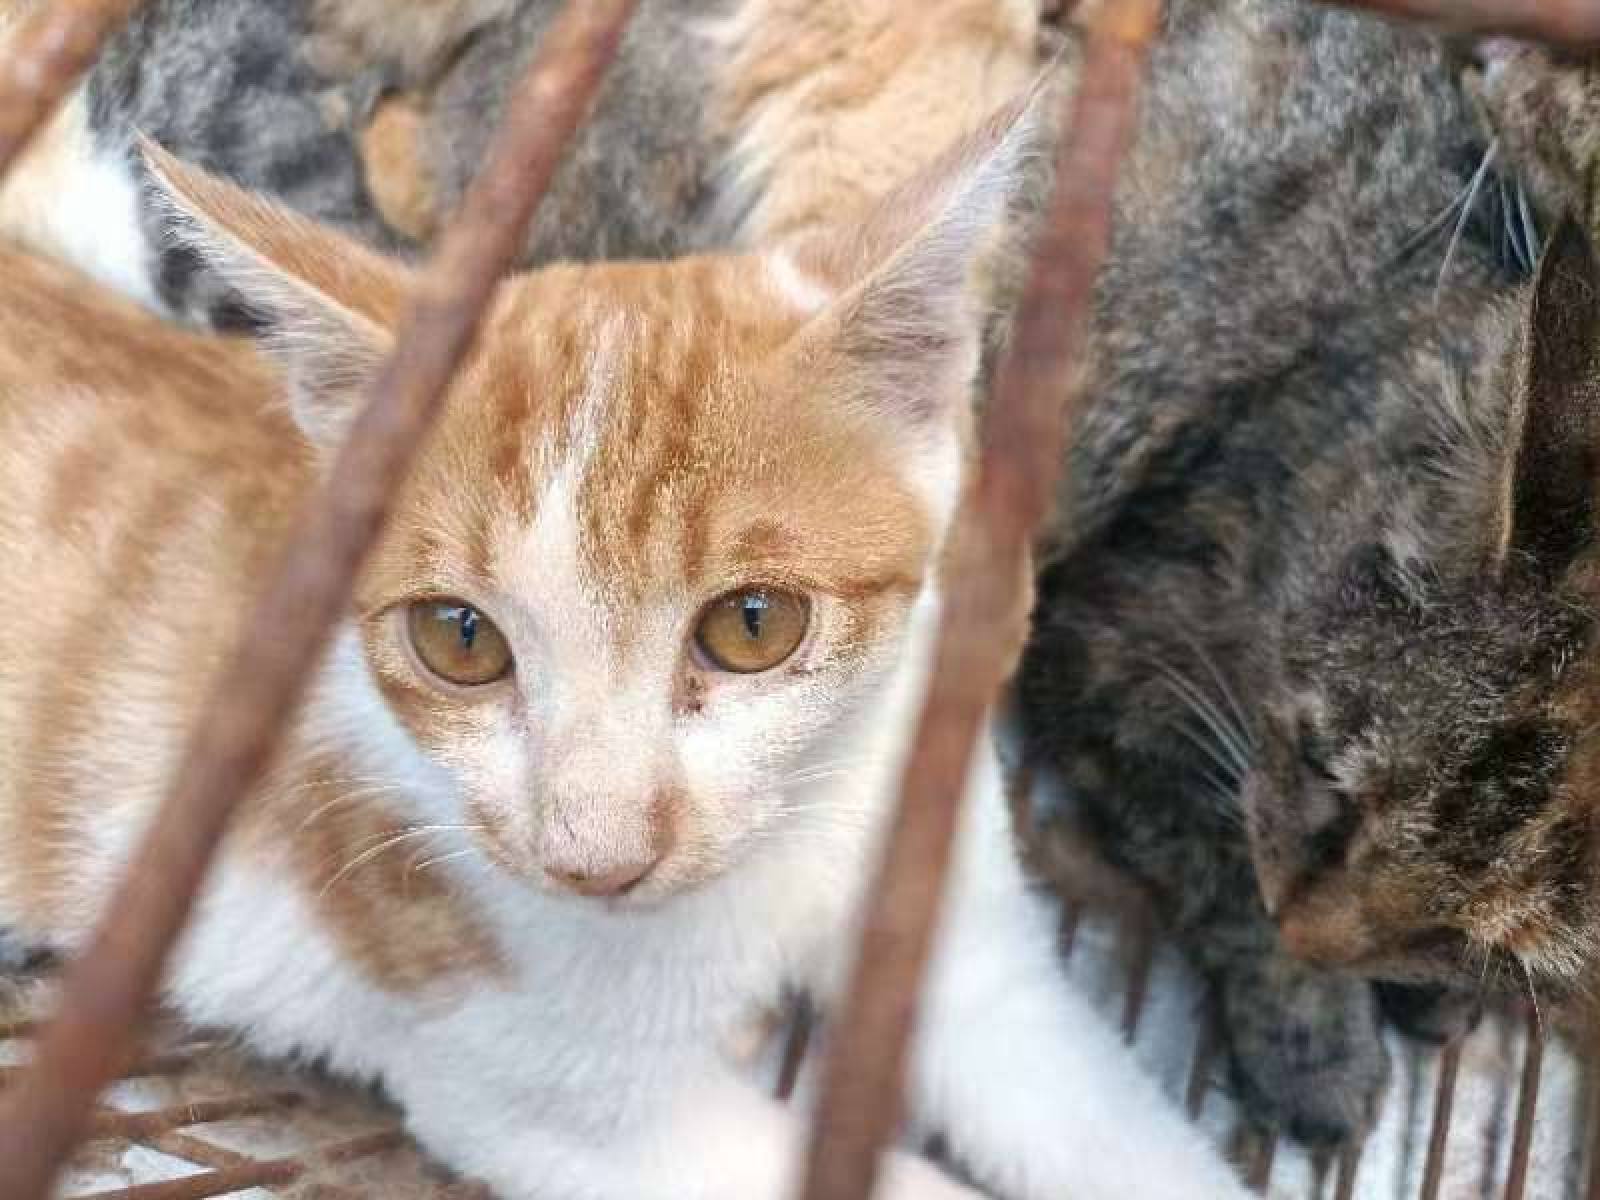 Of the 150 cats rescued, many appeared to have been pets before, said animal rights activists. Photo: HSI